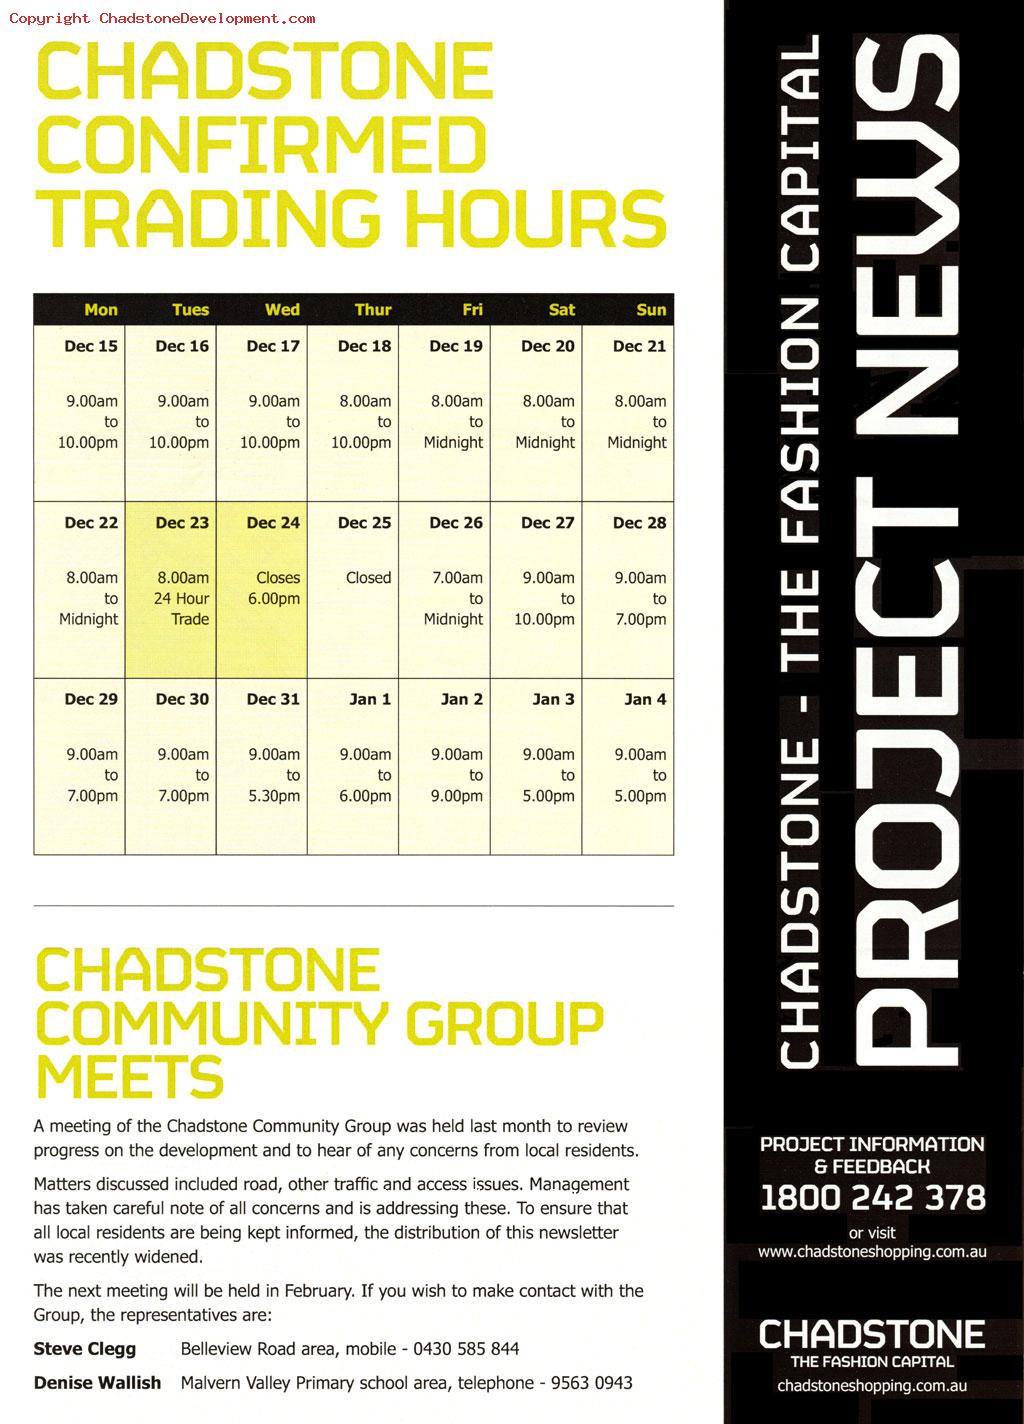 2008 Chadstone Christmas Trading hours - Chadstone Development Discussions